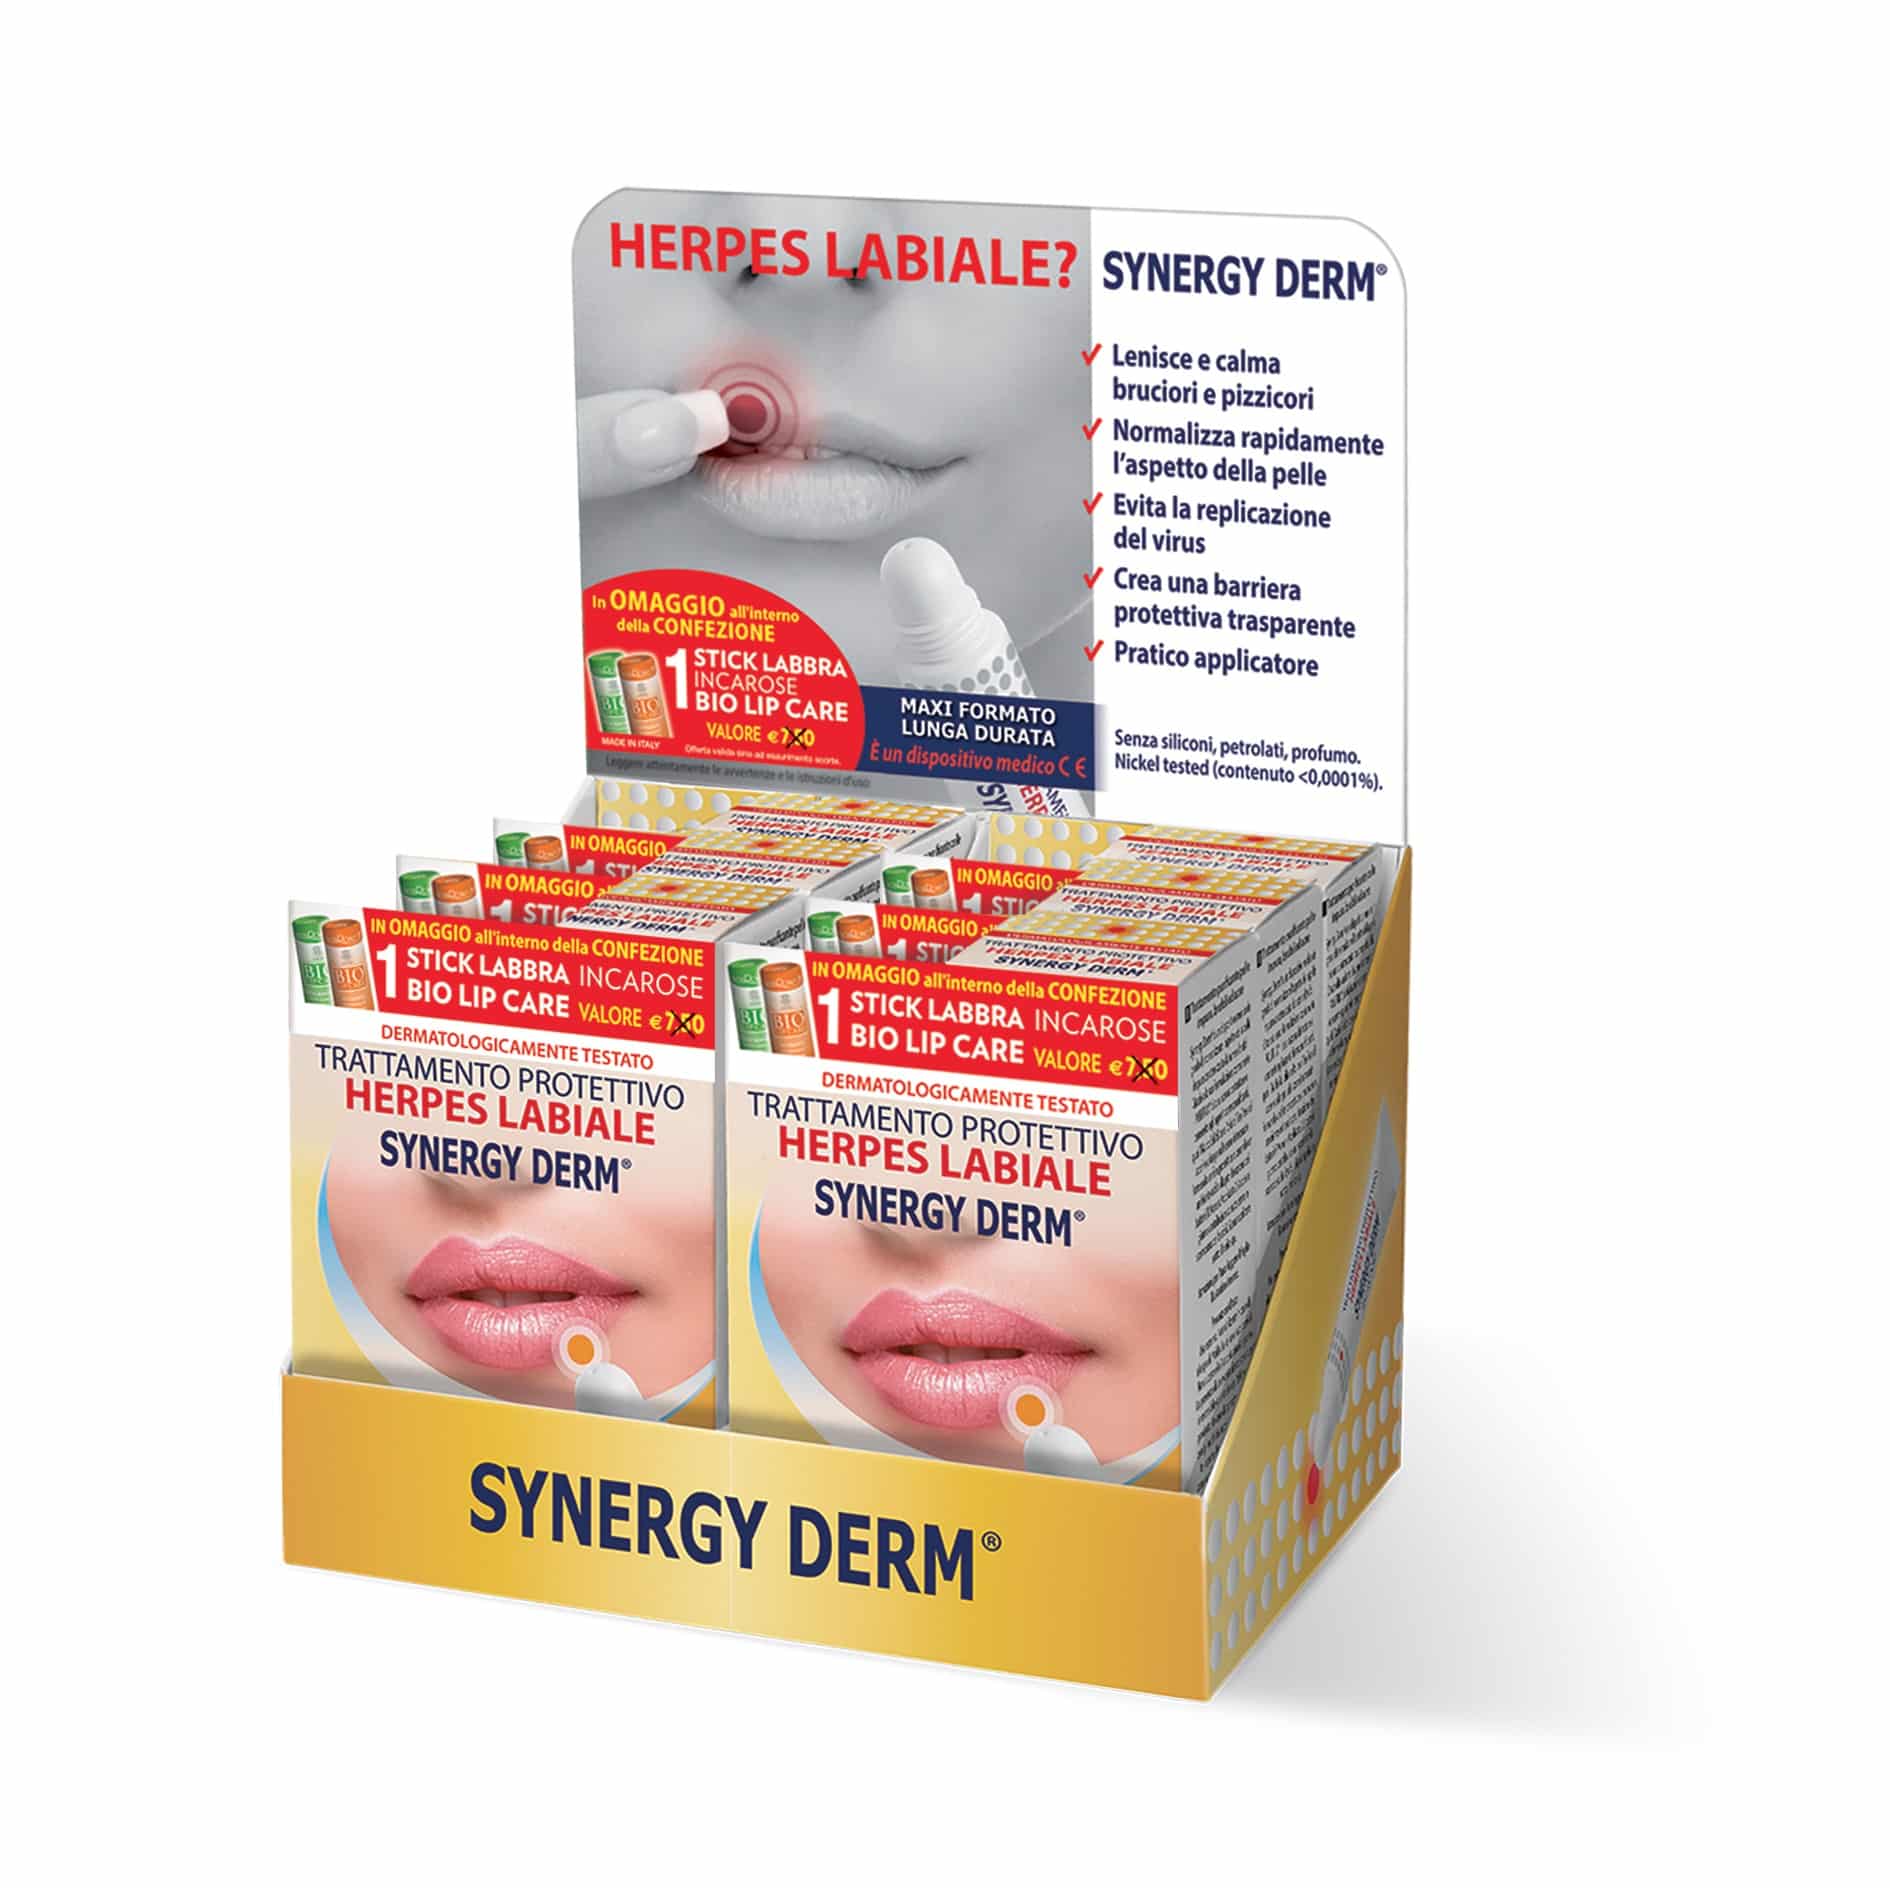 SYNERGY DERM_Herpes Labiale